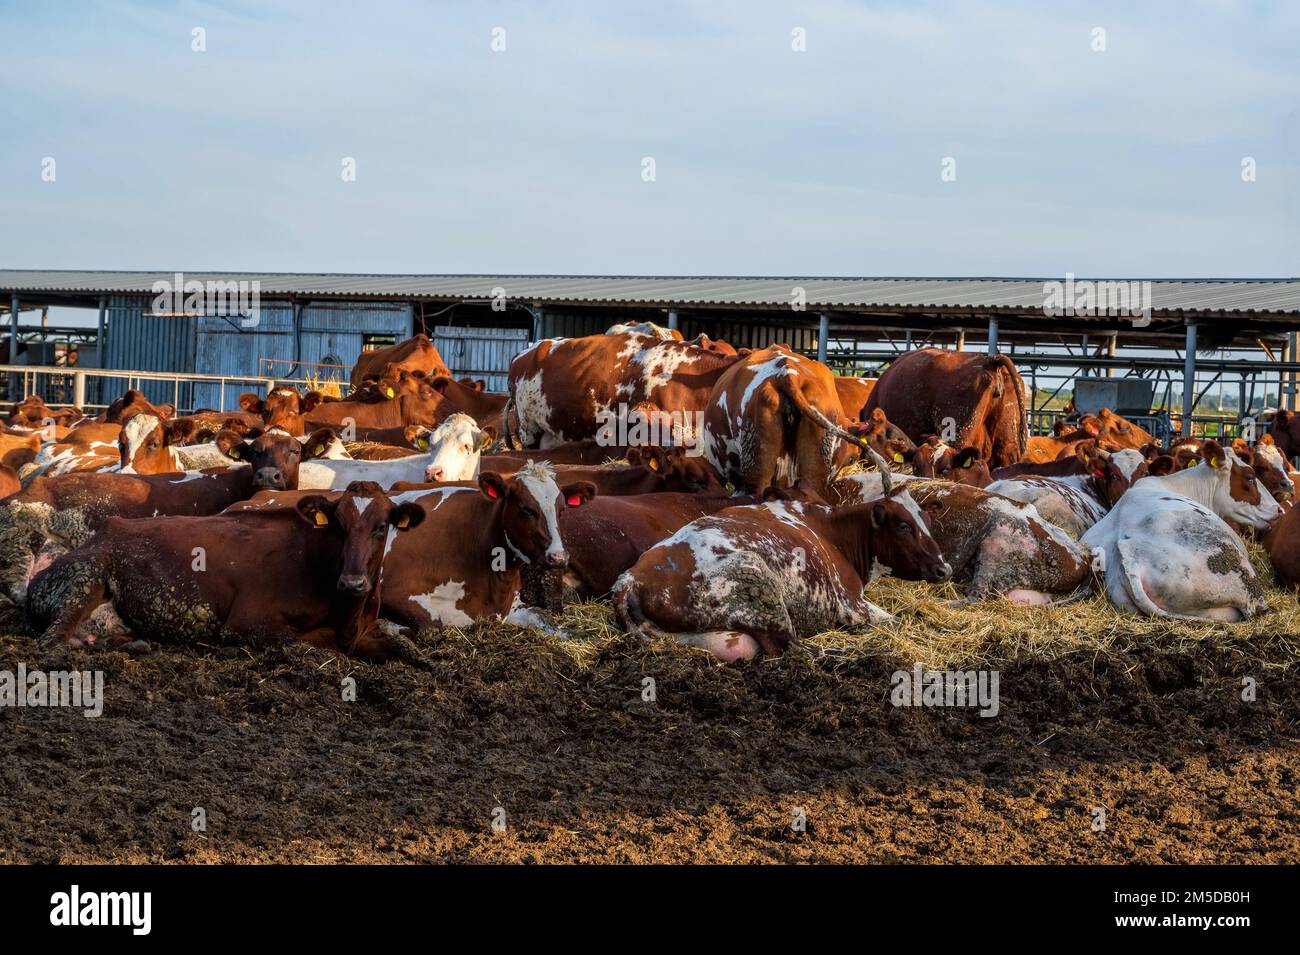 Red and white cows in a feedlot. Cattle farm Stock Photo